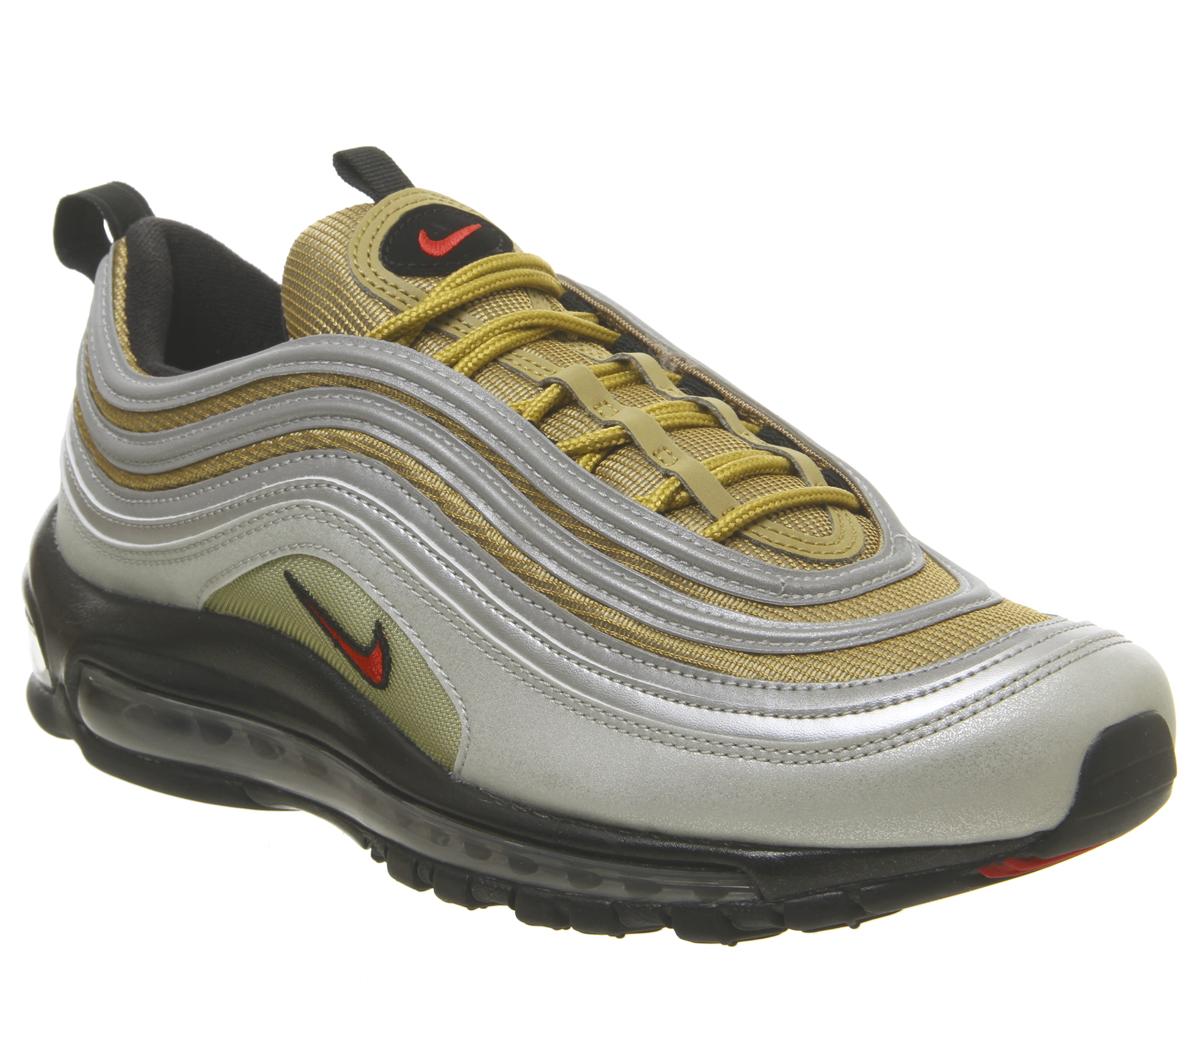 Nike Air Max 97 Trainers Silver Gold Black - His trainers